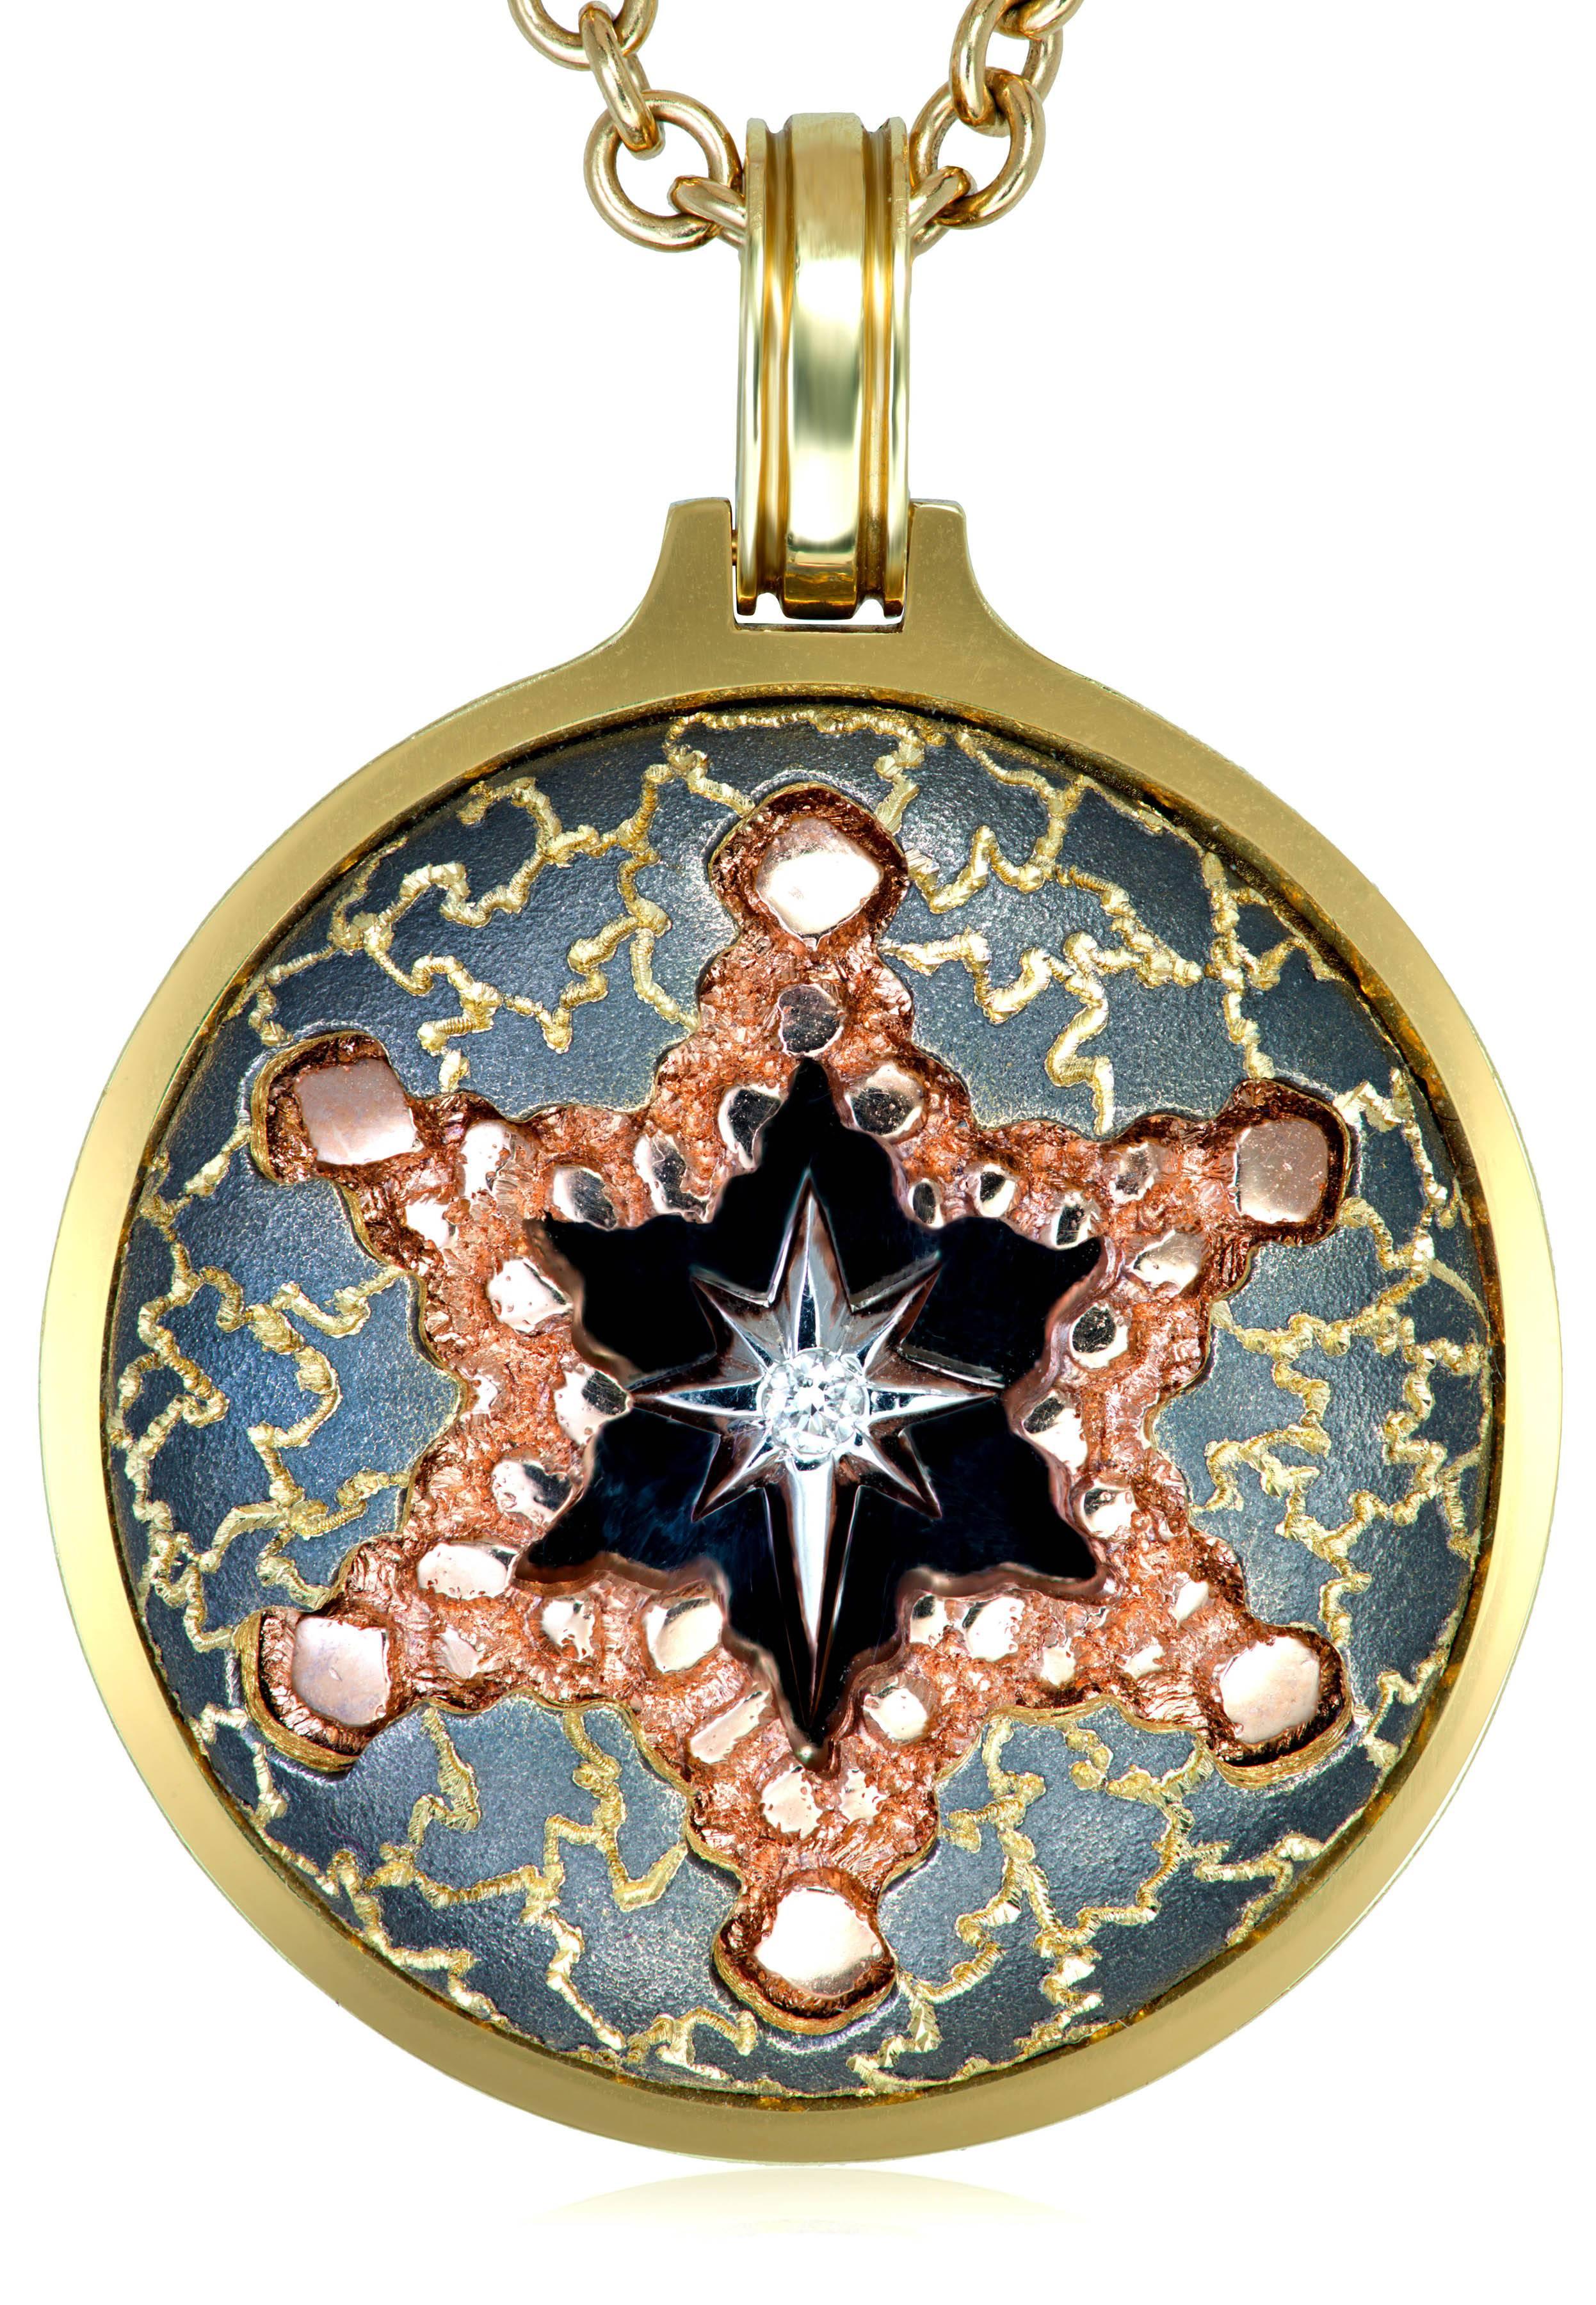 Alex Soldier Diamond Gold Star pendant in 18 karat white, yellow and rose gold features a special mirror effect to enhance multi-dimensional appeal. The composition is further enhanced with final touches of fine texturing, hand-applied in several